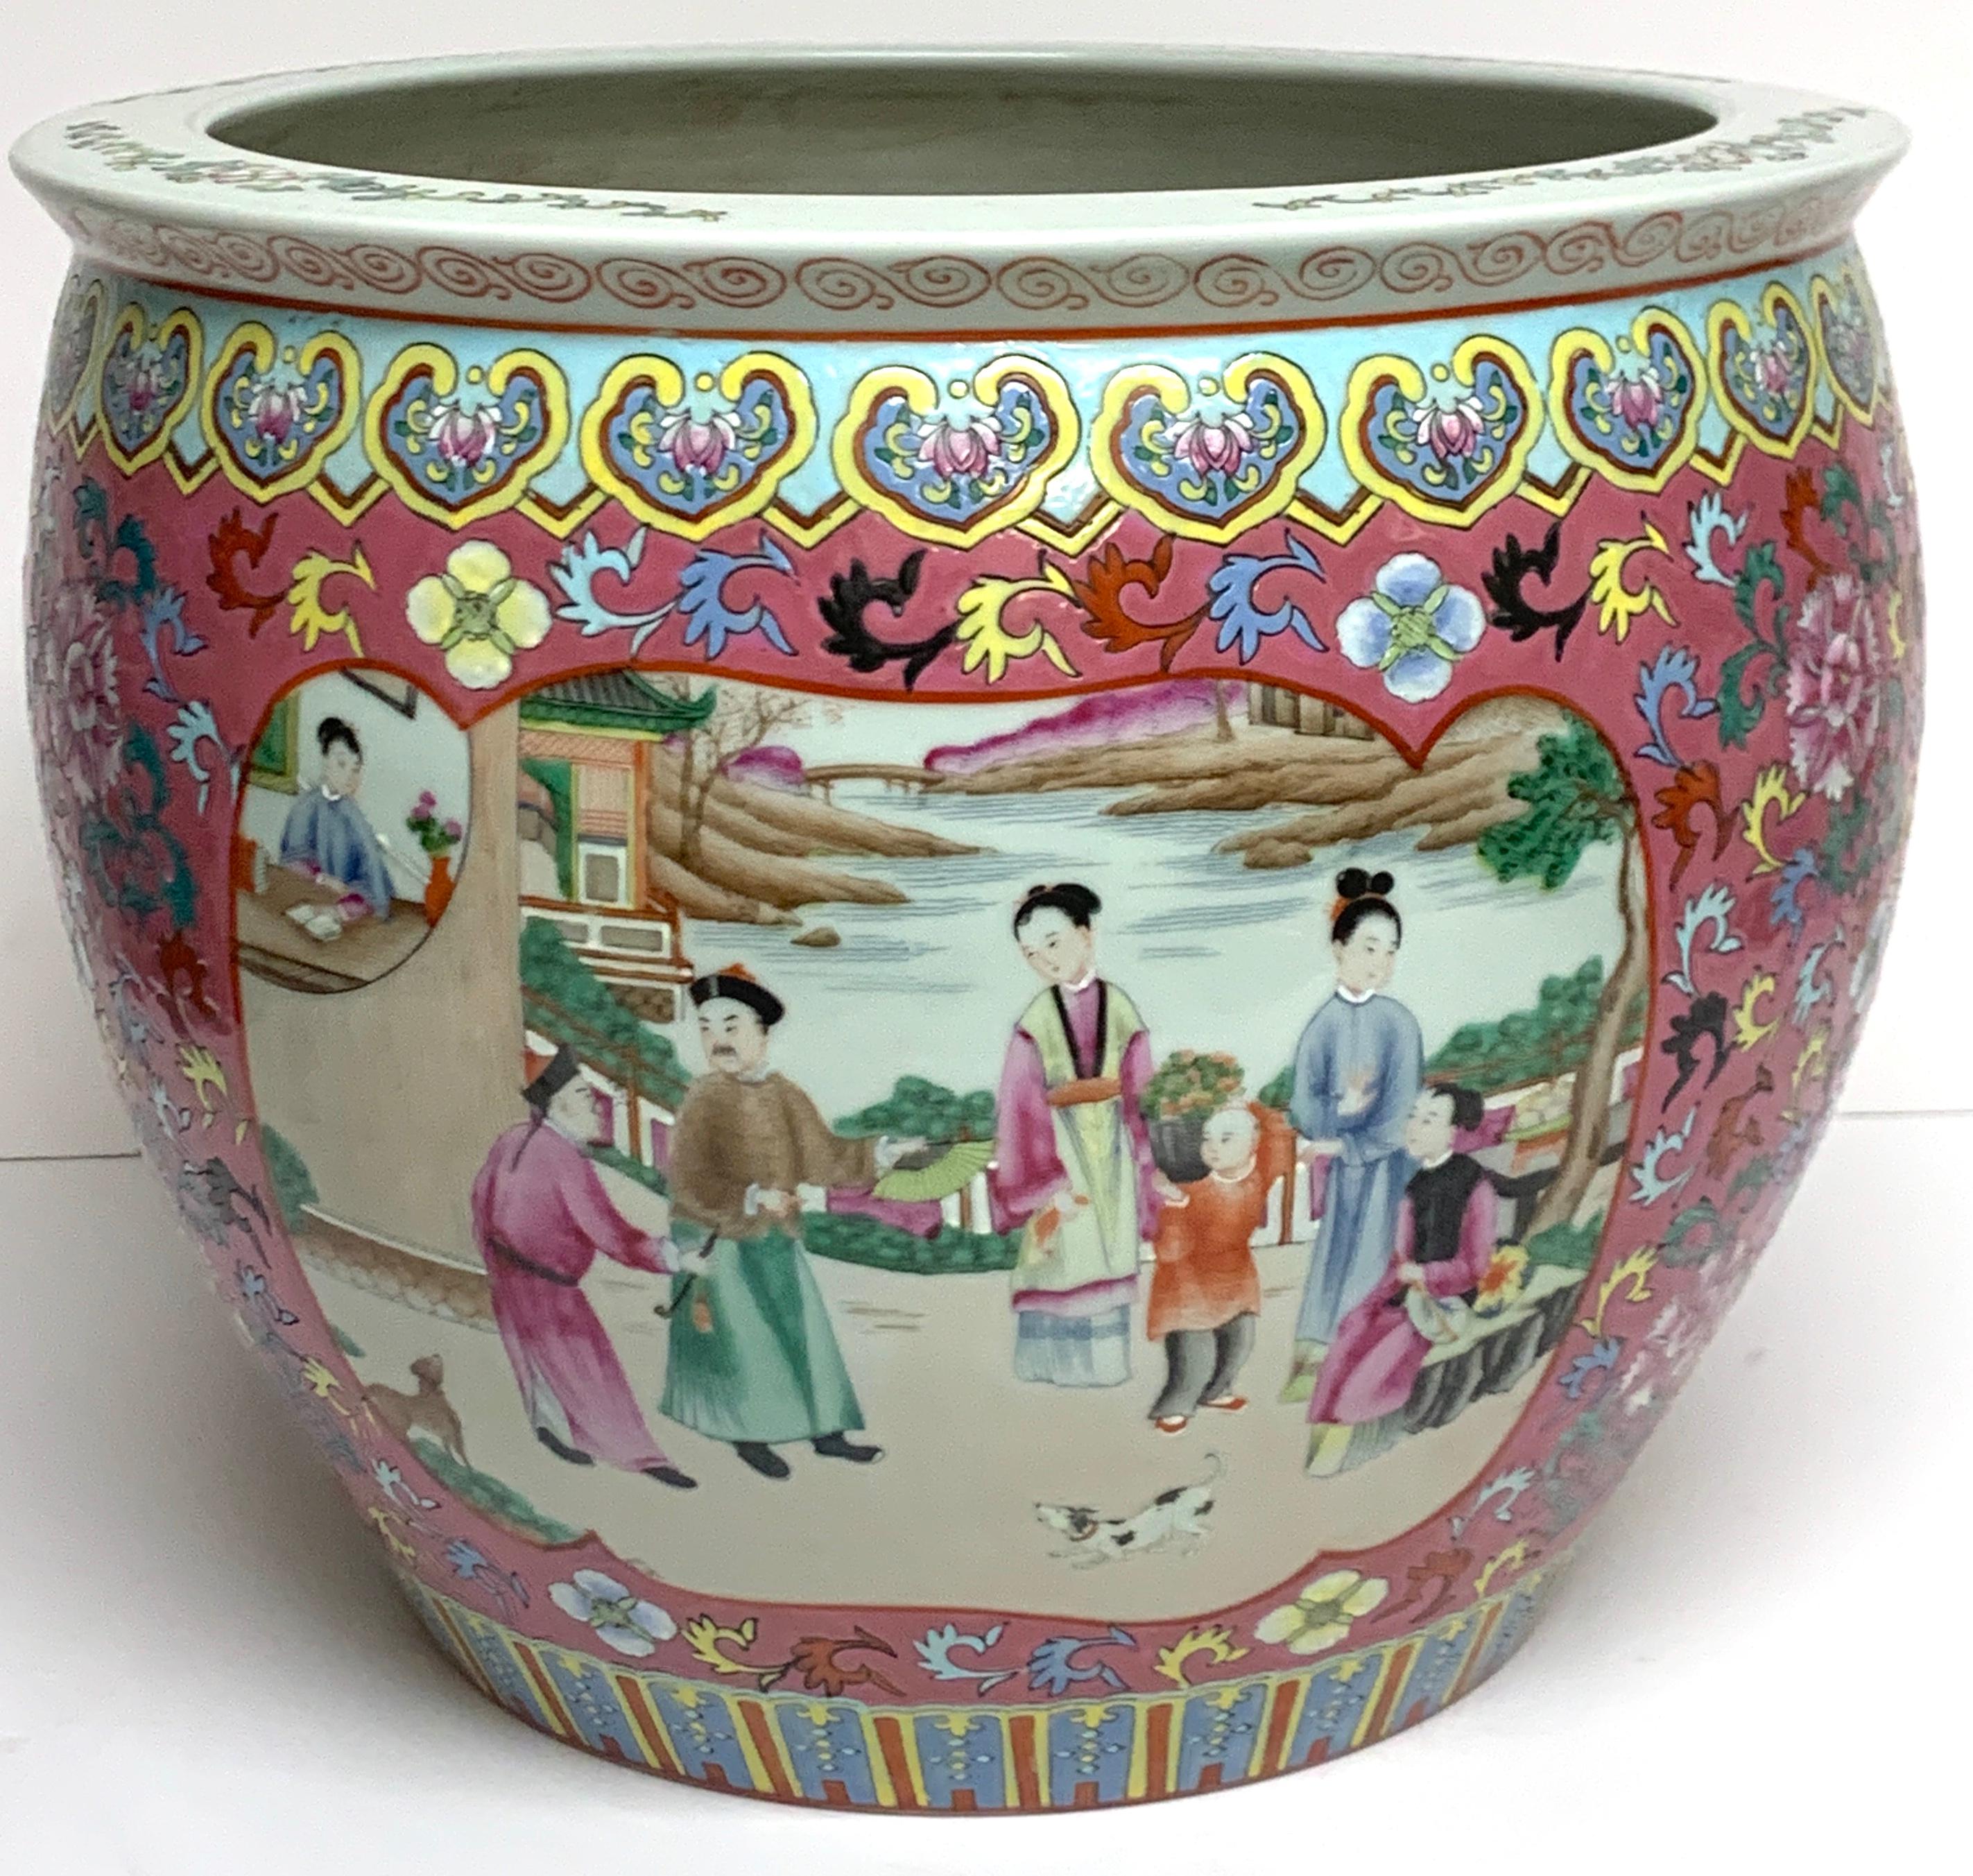 Fine Chinese Famille Verte fishbowl, with rich plum enameled background, two finely painted court scenes, the interior painted with goldfish and foliage. The bottom with a square red reign mark
The interior measures: 11.5